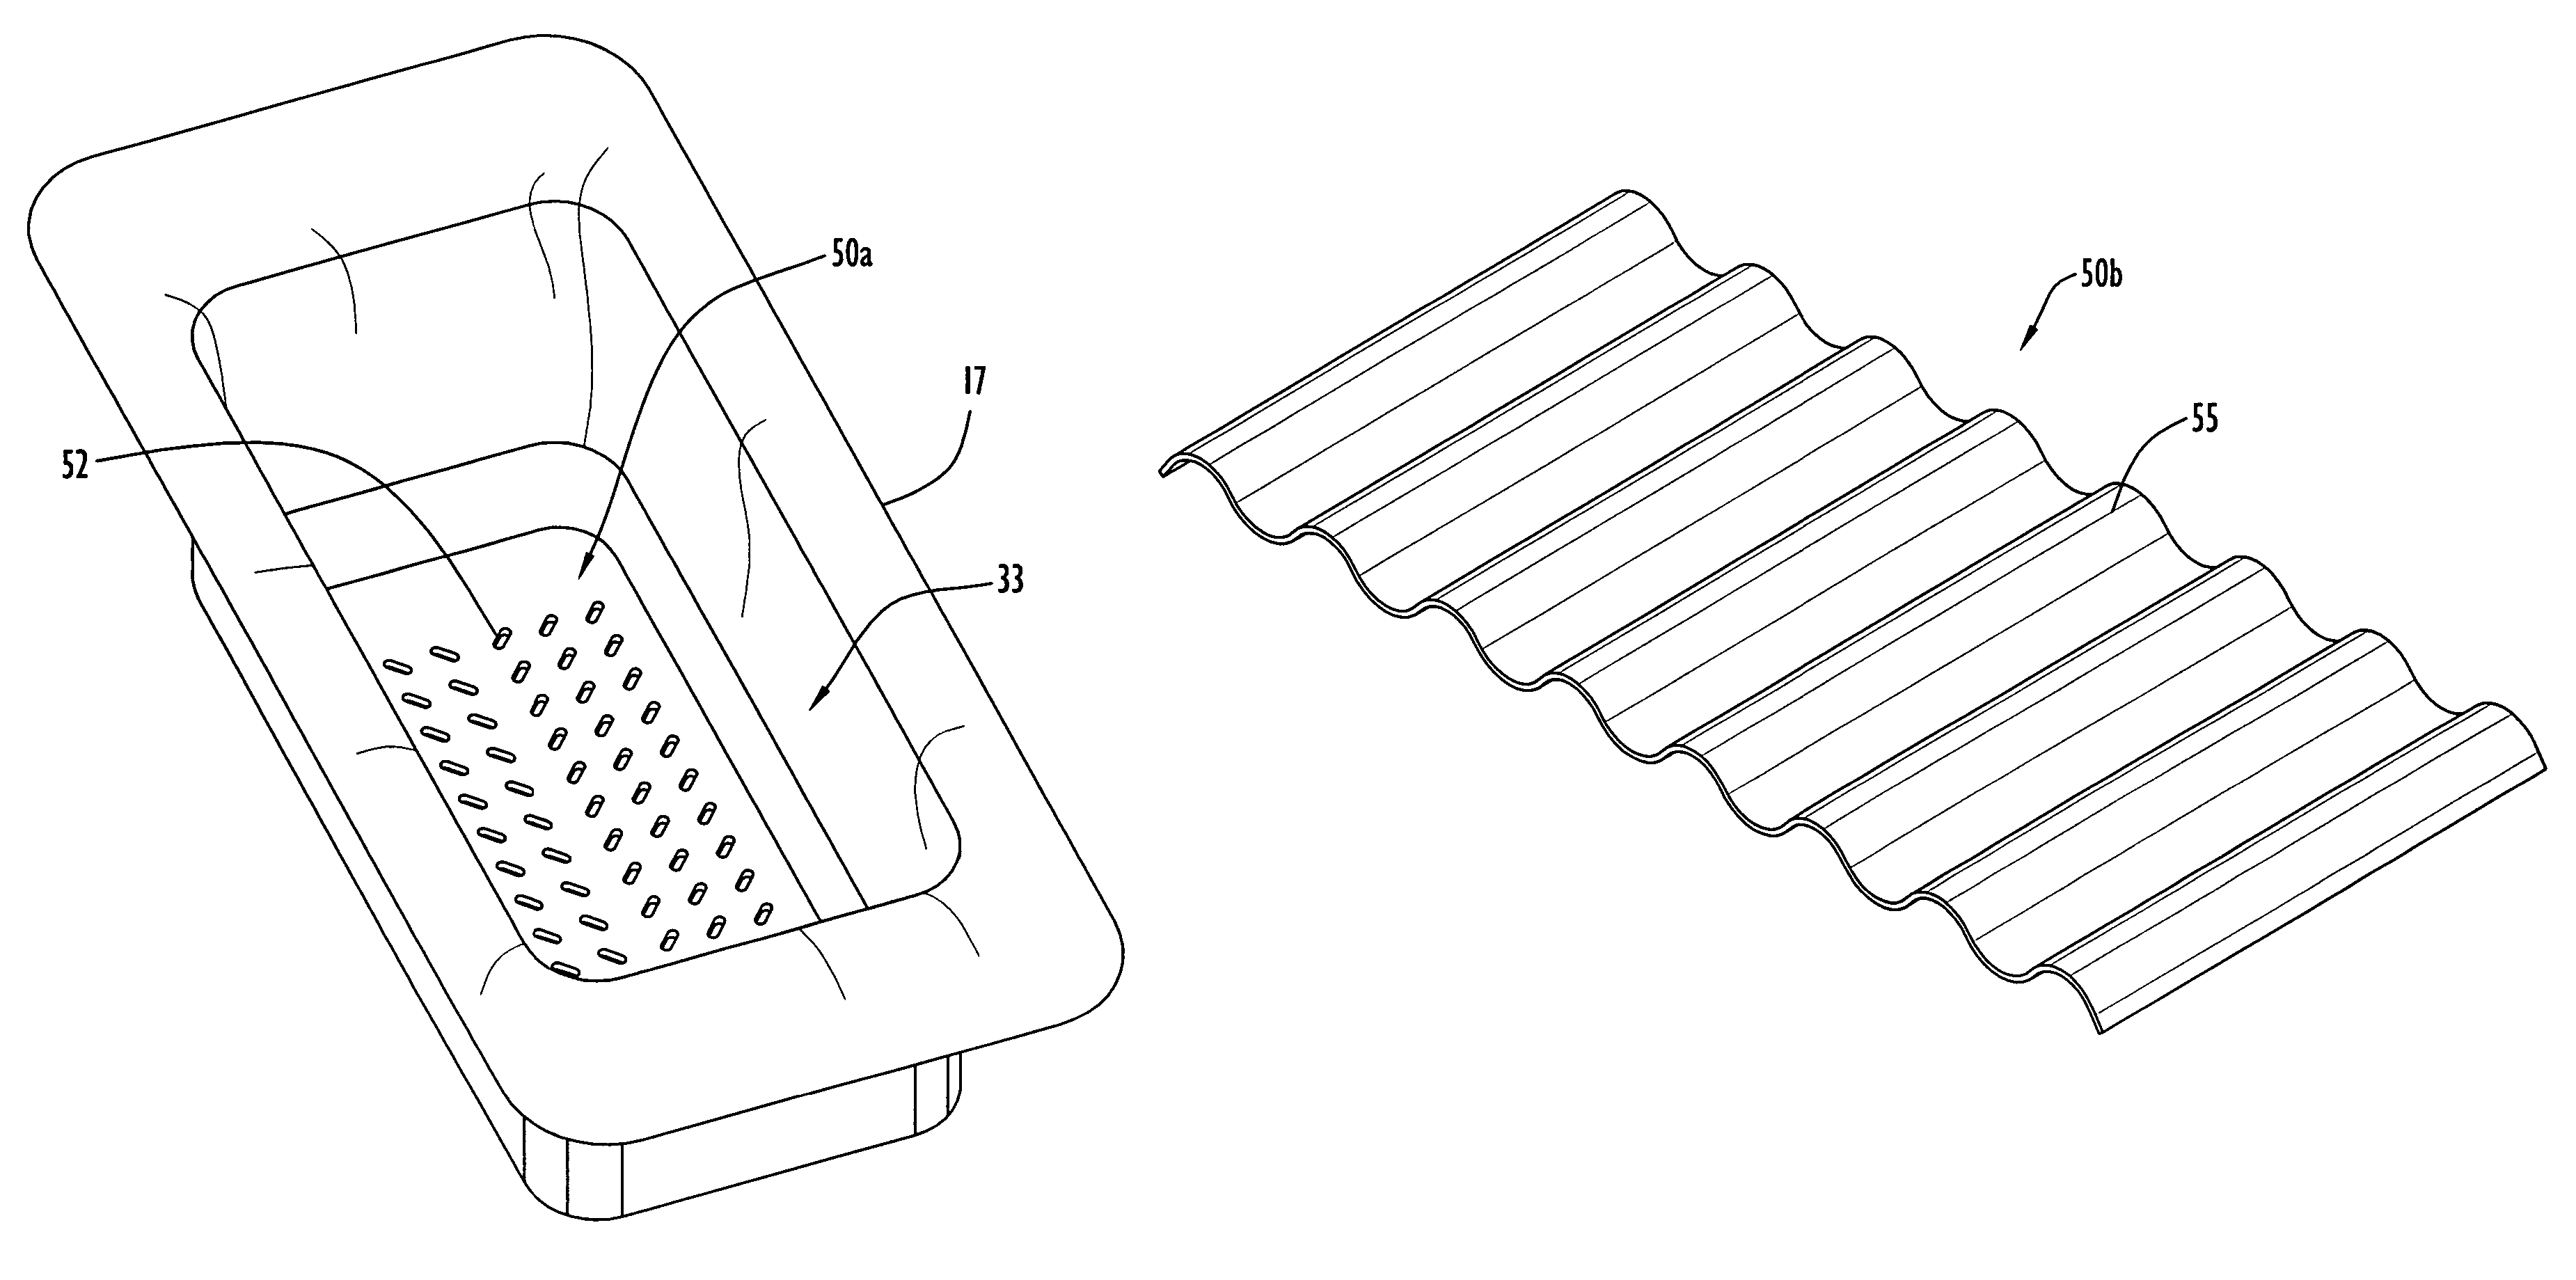 Method and apparatus for protecting sterile drapes in surgical thermal treatment systems